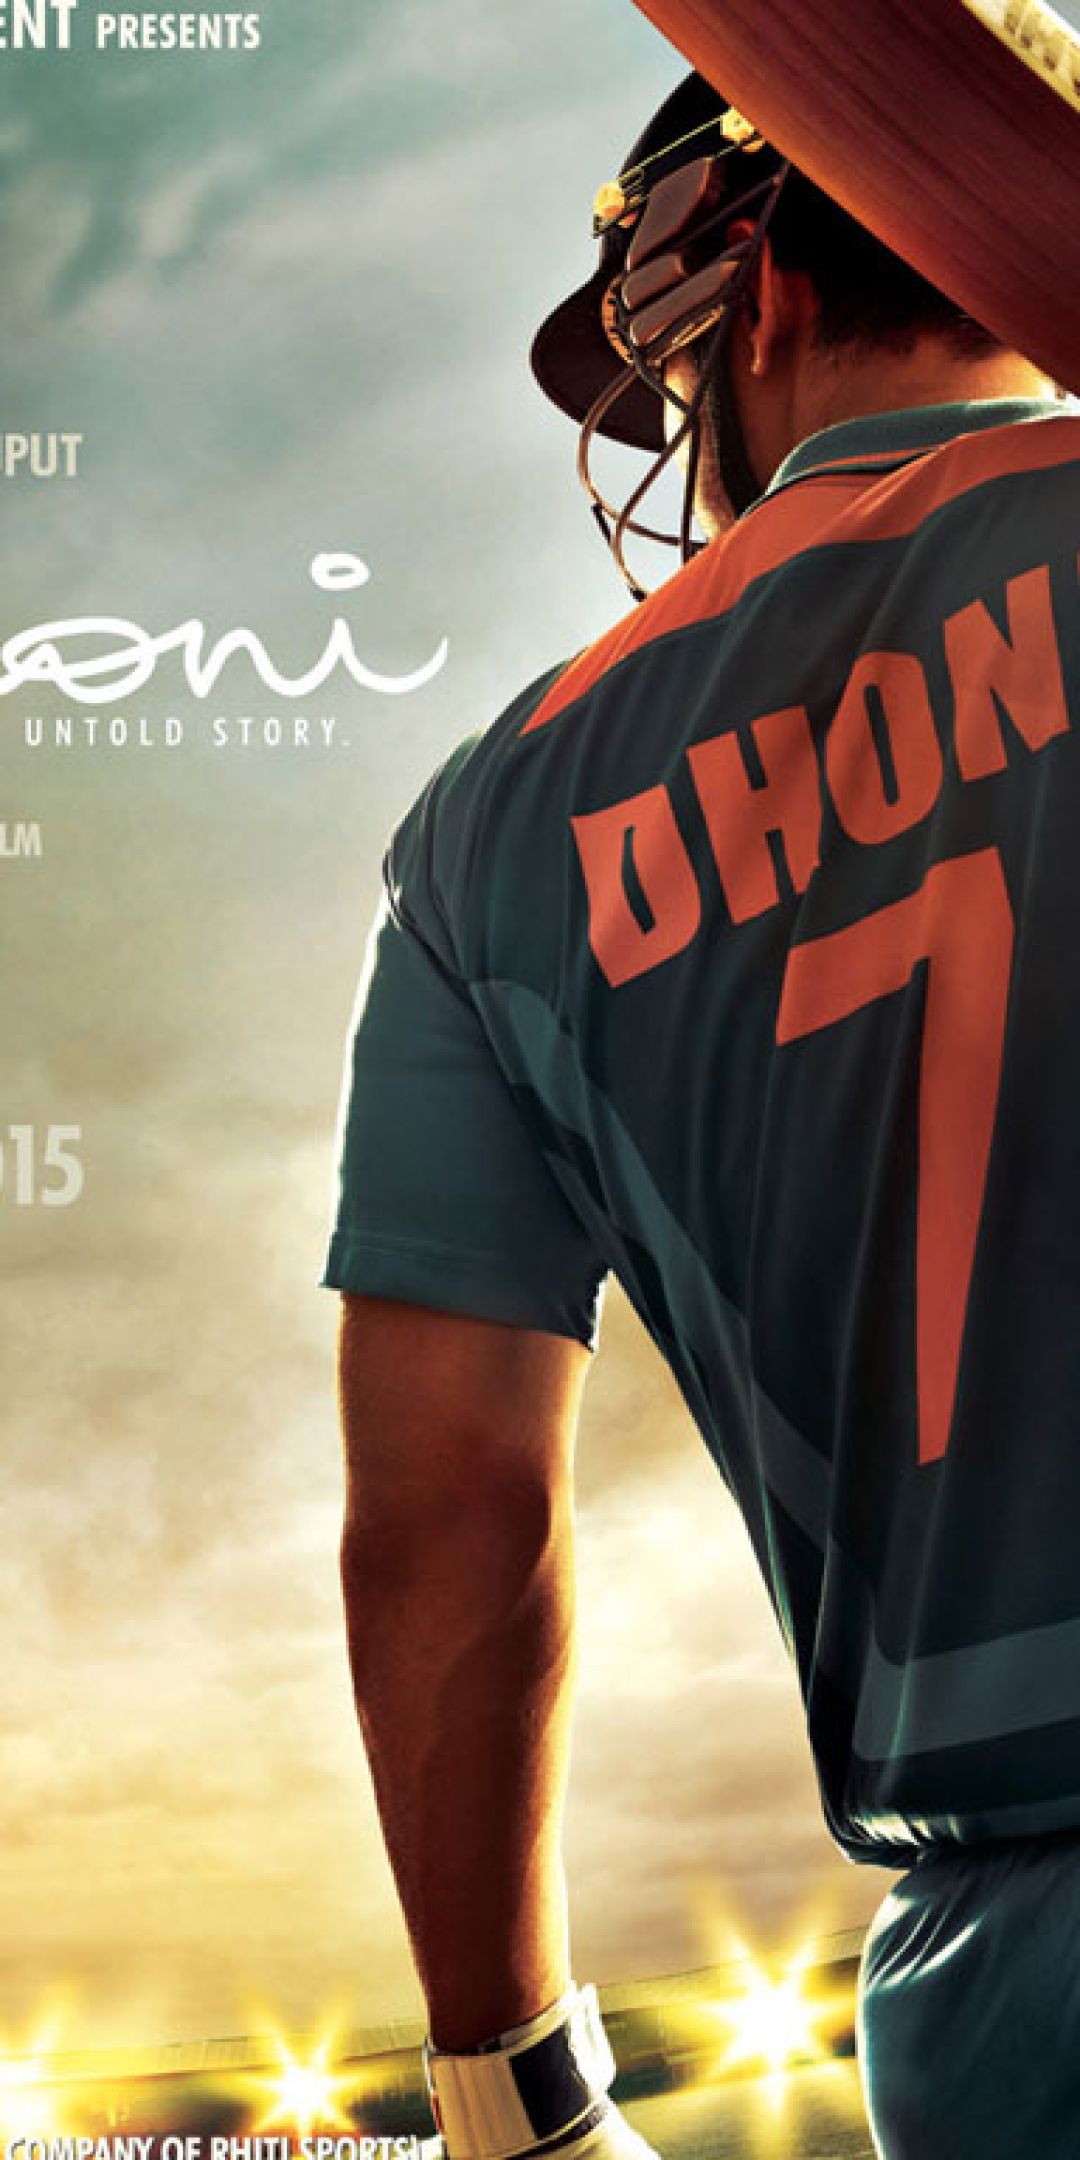 MS Dhoni Untold Story Poster One Plus 5T, Honor 7x, Honor